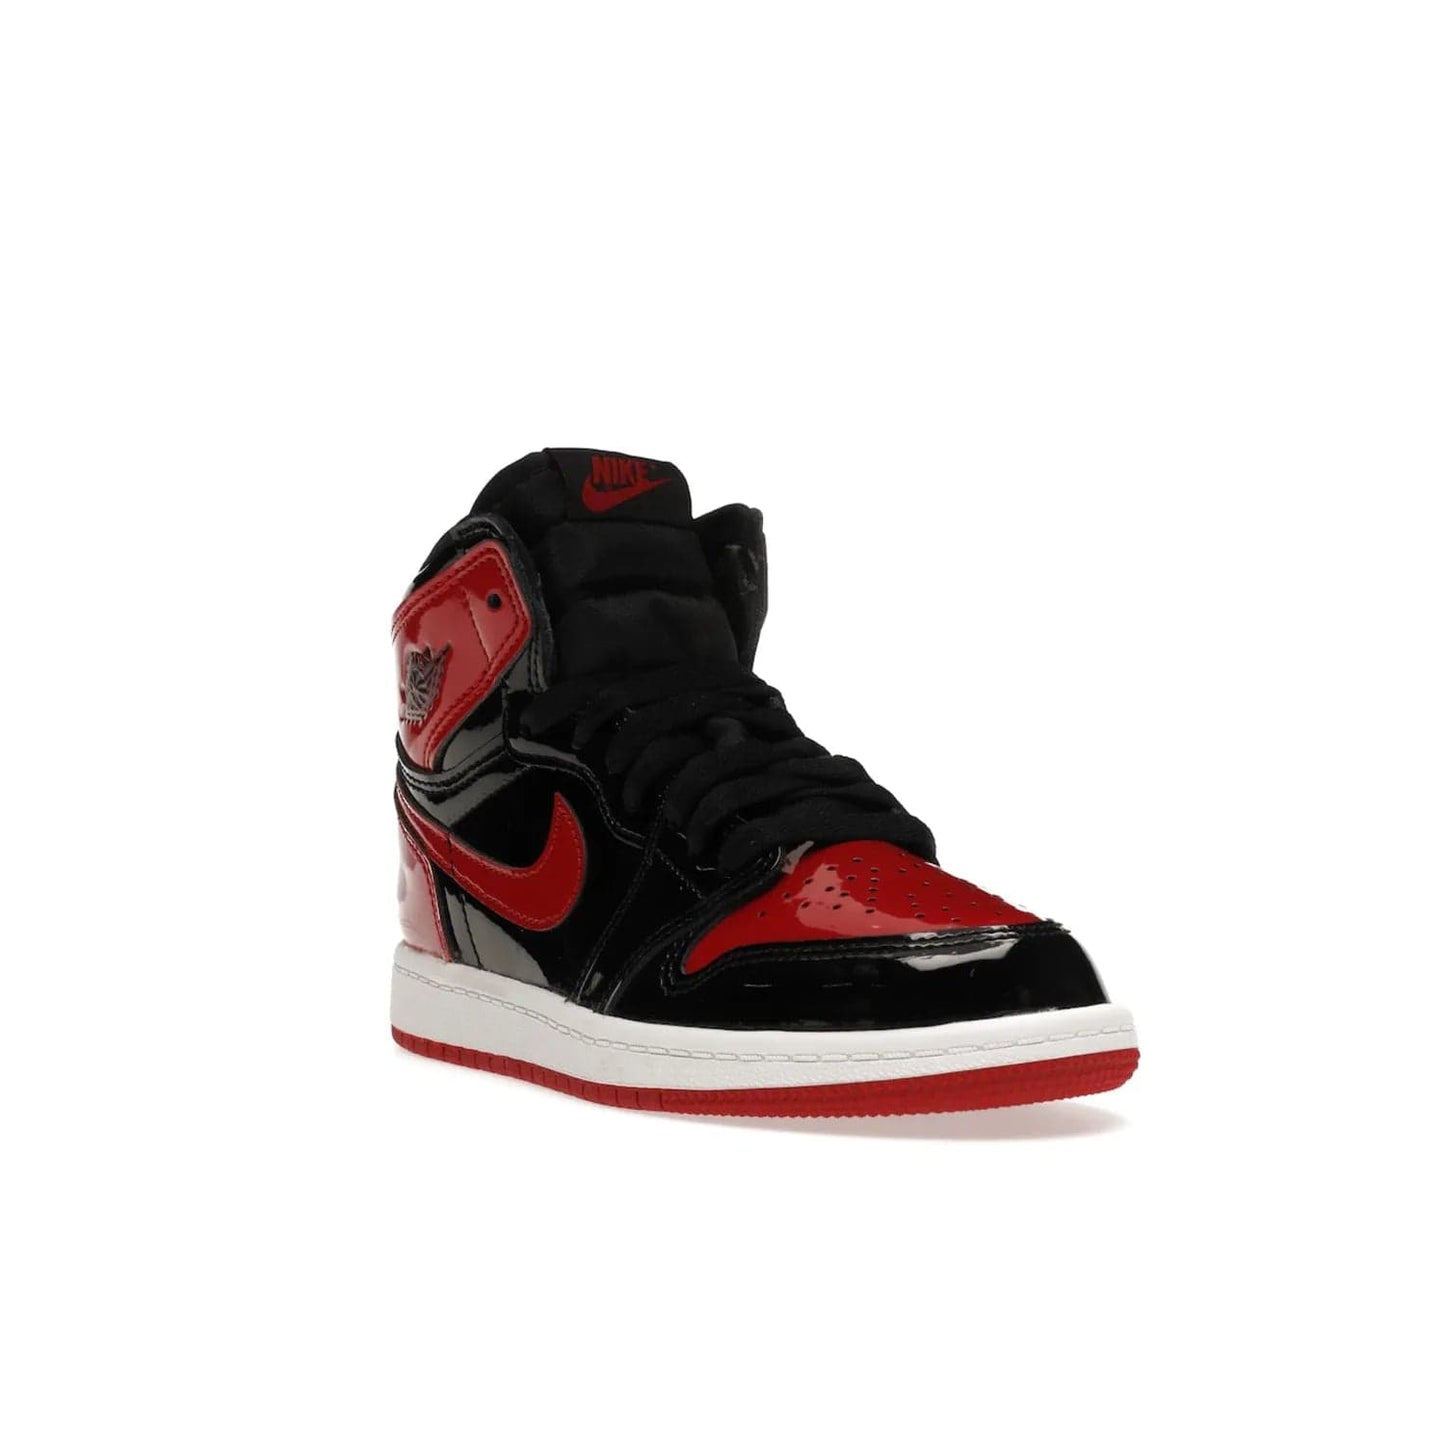 Jordan 1 Retro High OG Patent Bred (PS) - Image 7 - Only at www.BallersClubKickz.com - A timeless classic, the Air Jordan 1 Retro High OG Bred Patent PS features patent leather and debossed Air Jordan Wings motifs. Classic black, white and varsity red colourway on a comfortable and stylish sneaker. Shop this must-have now.